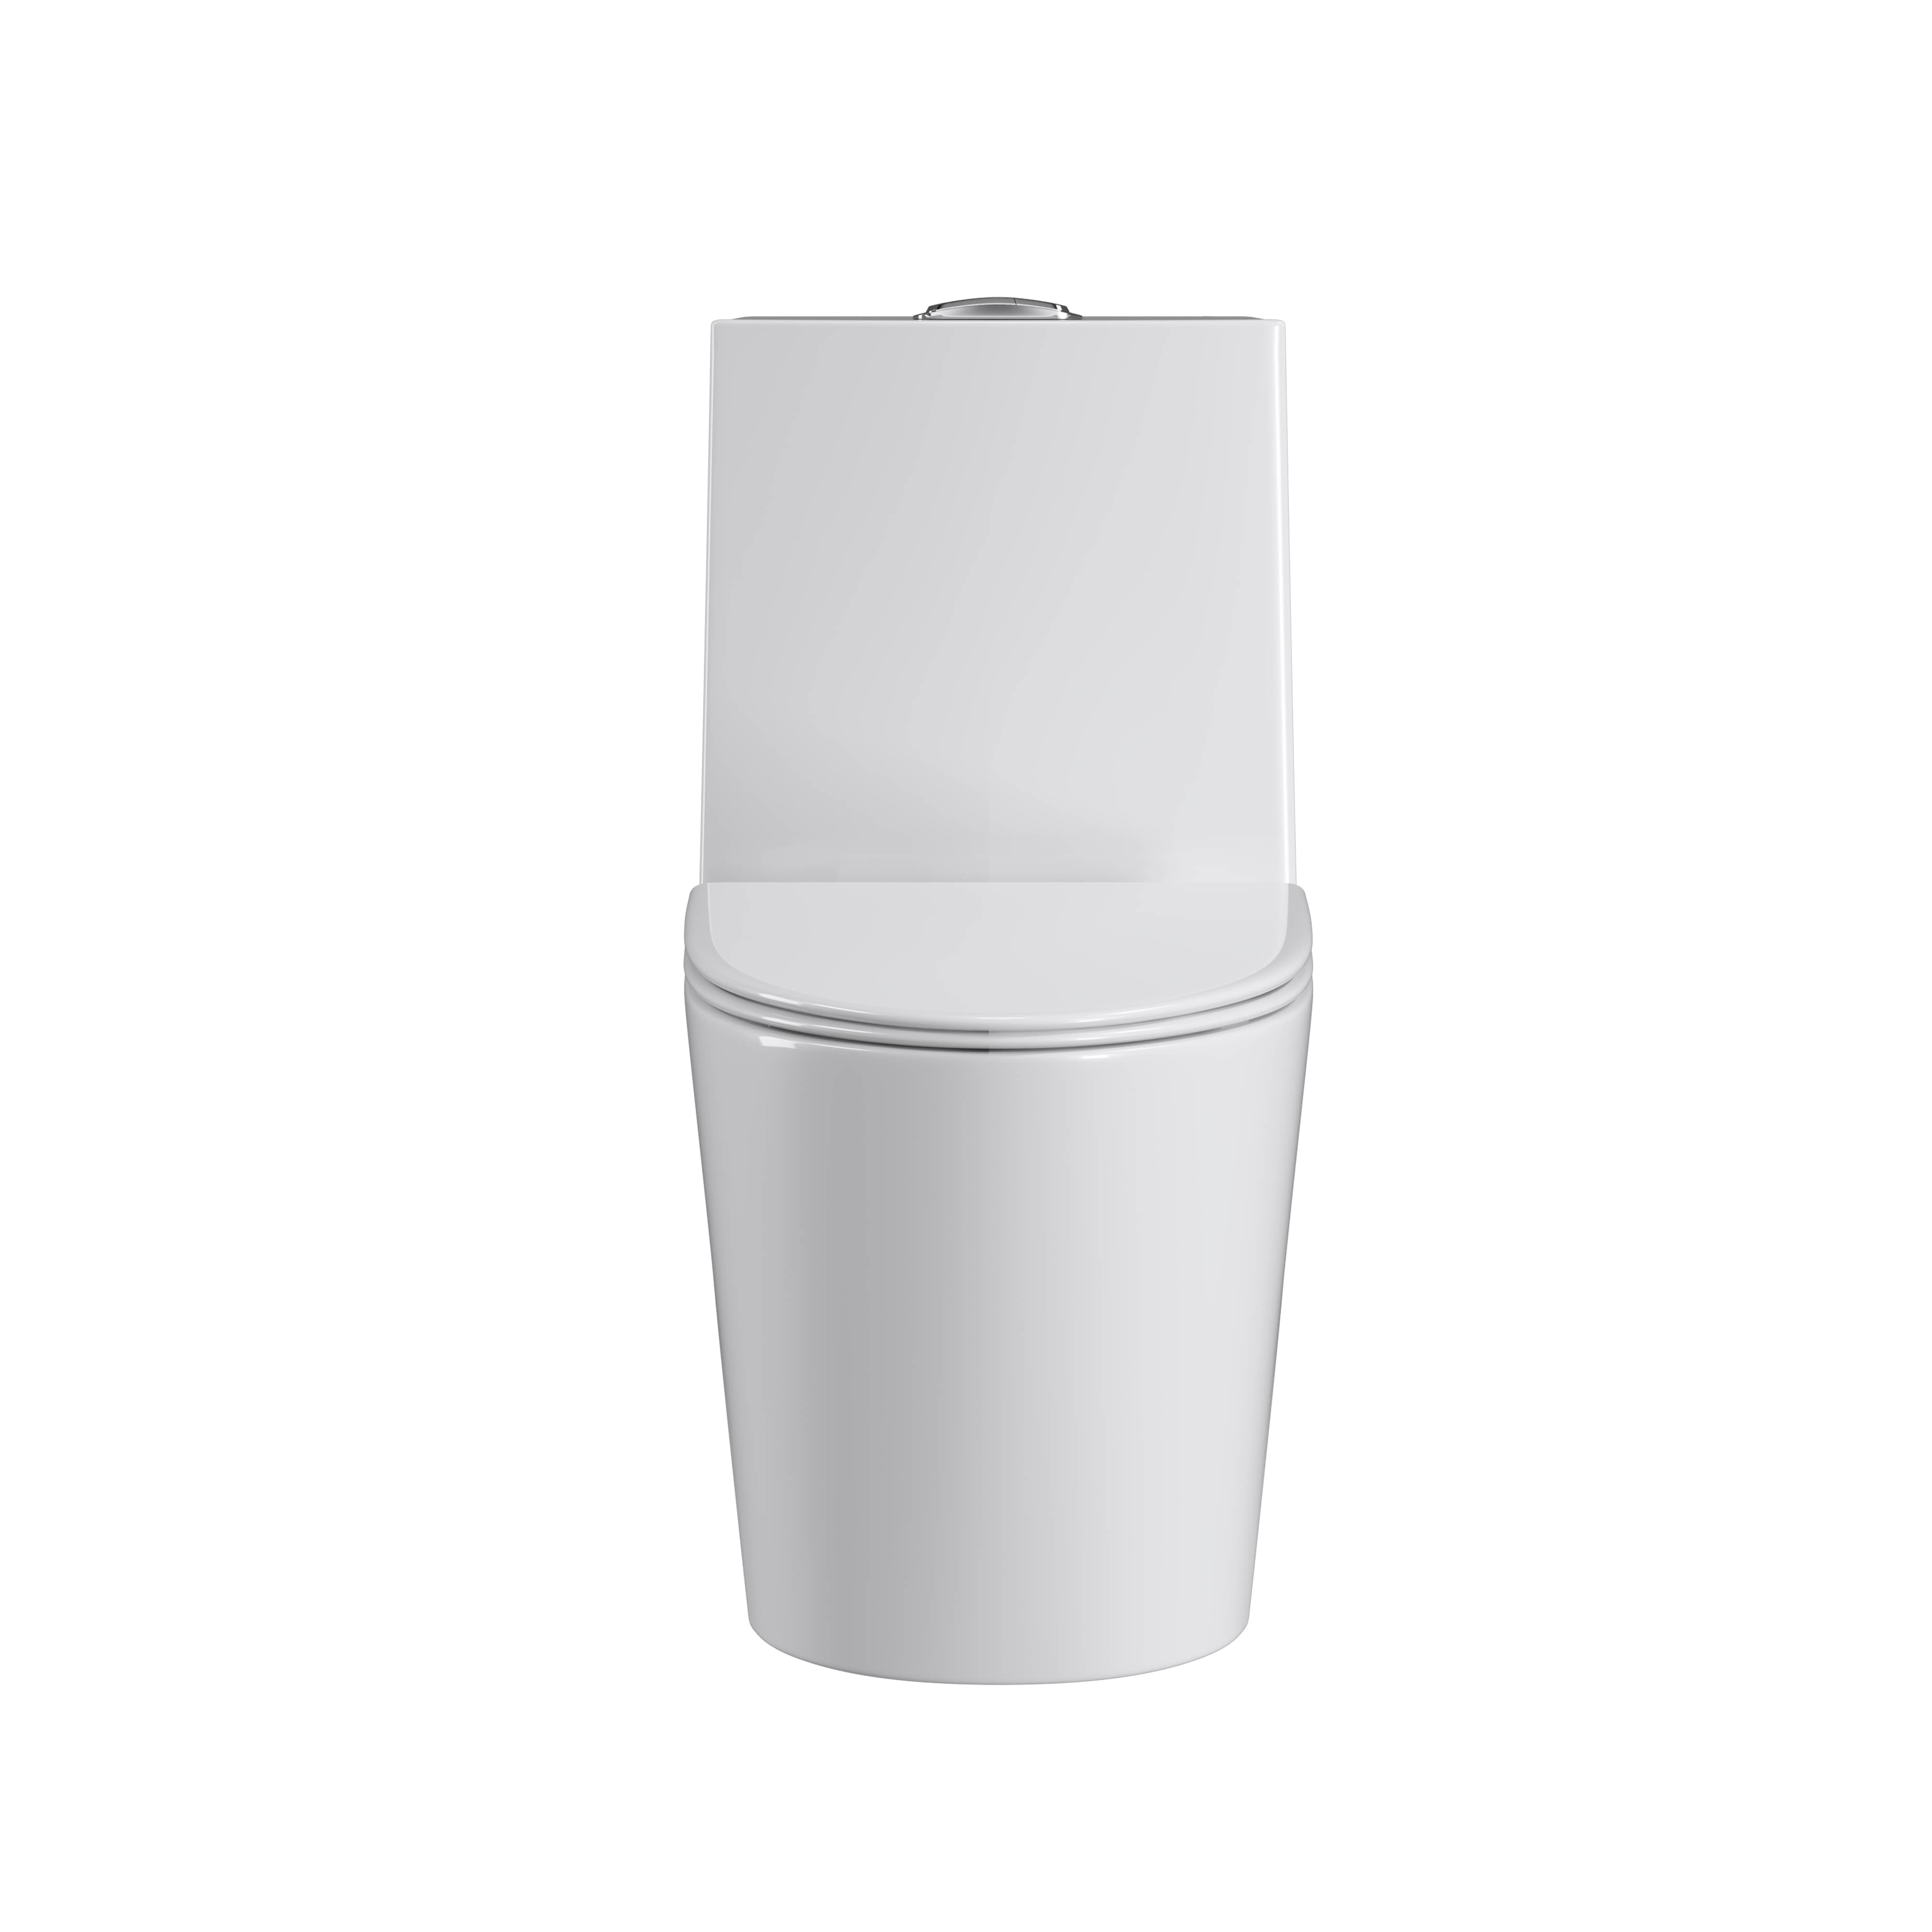 Dual Flush Elongated Standard White Toilet with Soft Close Seat Cover, High-Efficiency Supply, and White Finish Toilet Bowl 